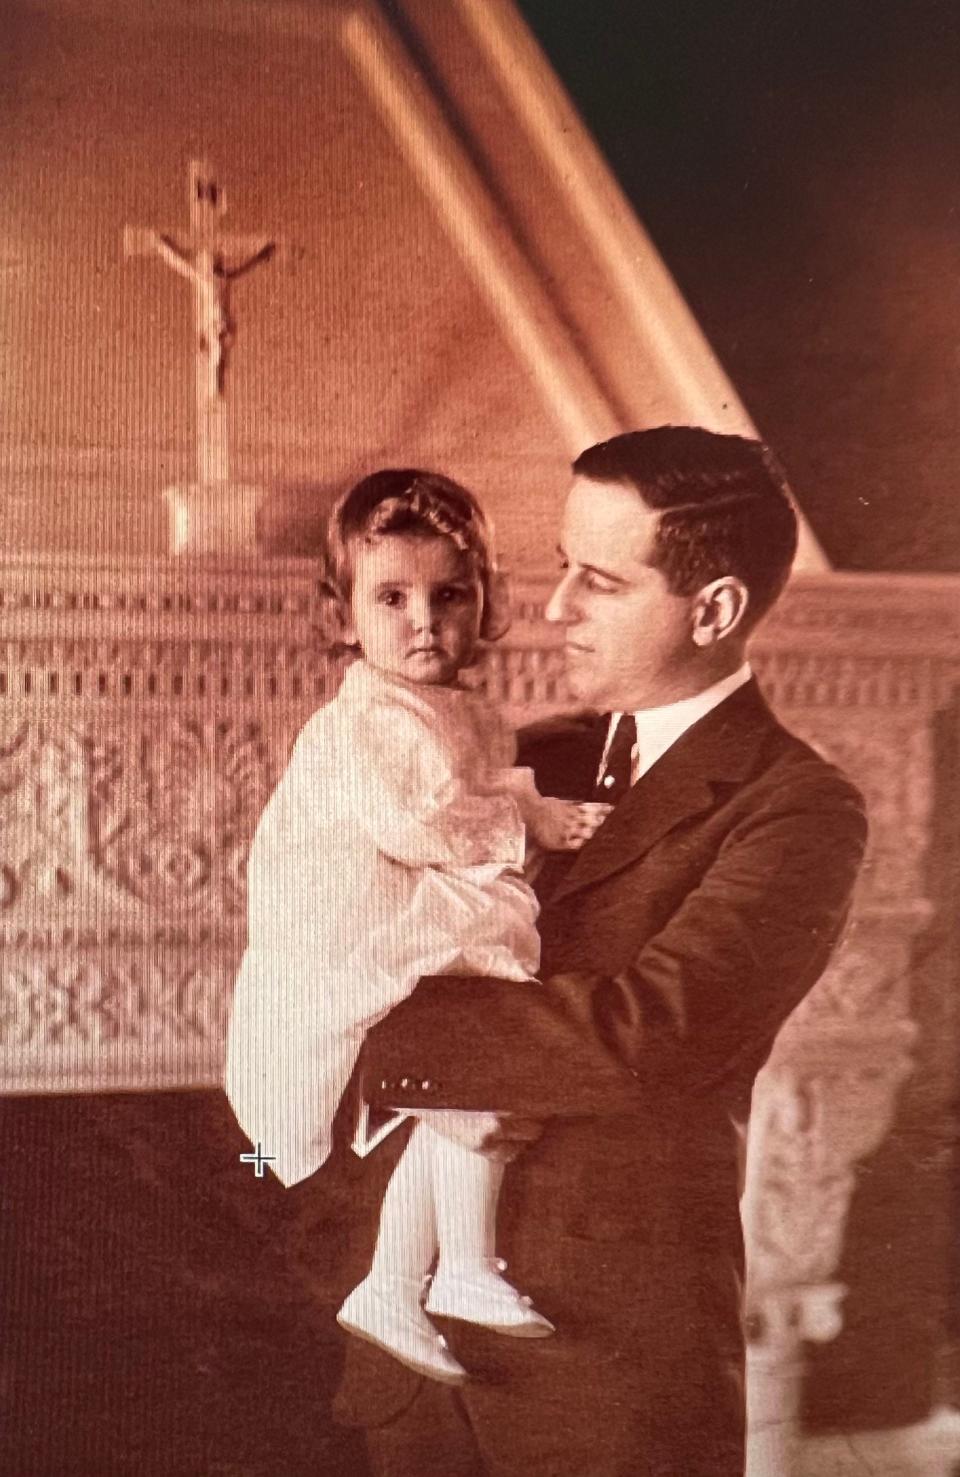 H. Wendell Endicott holding his daughter, about 1925.